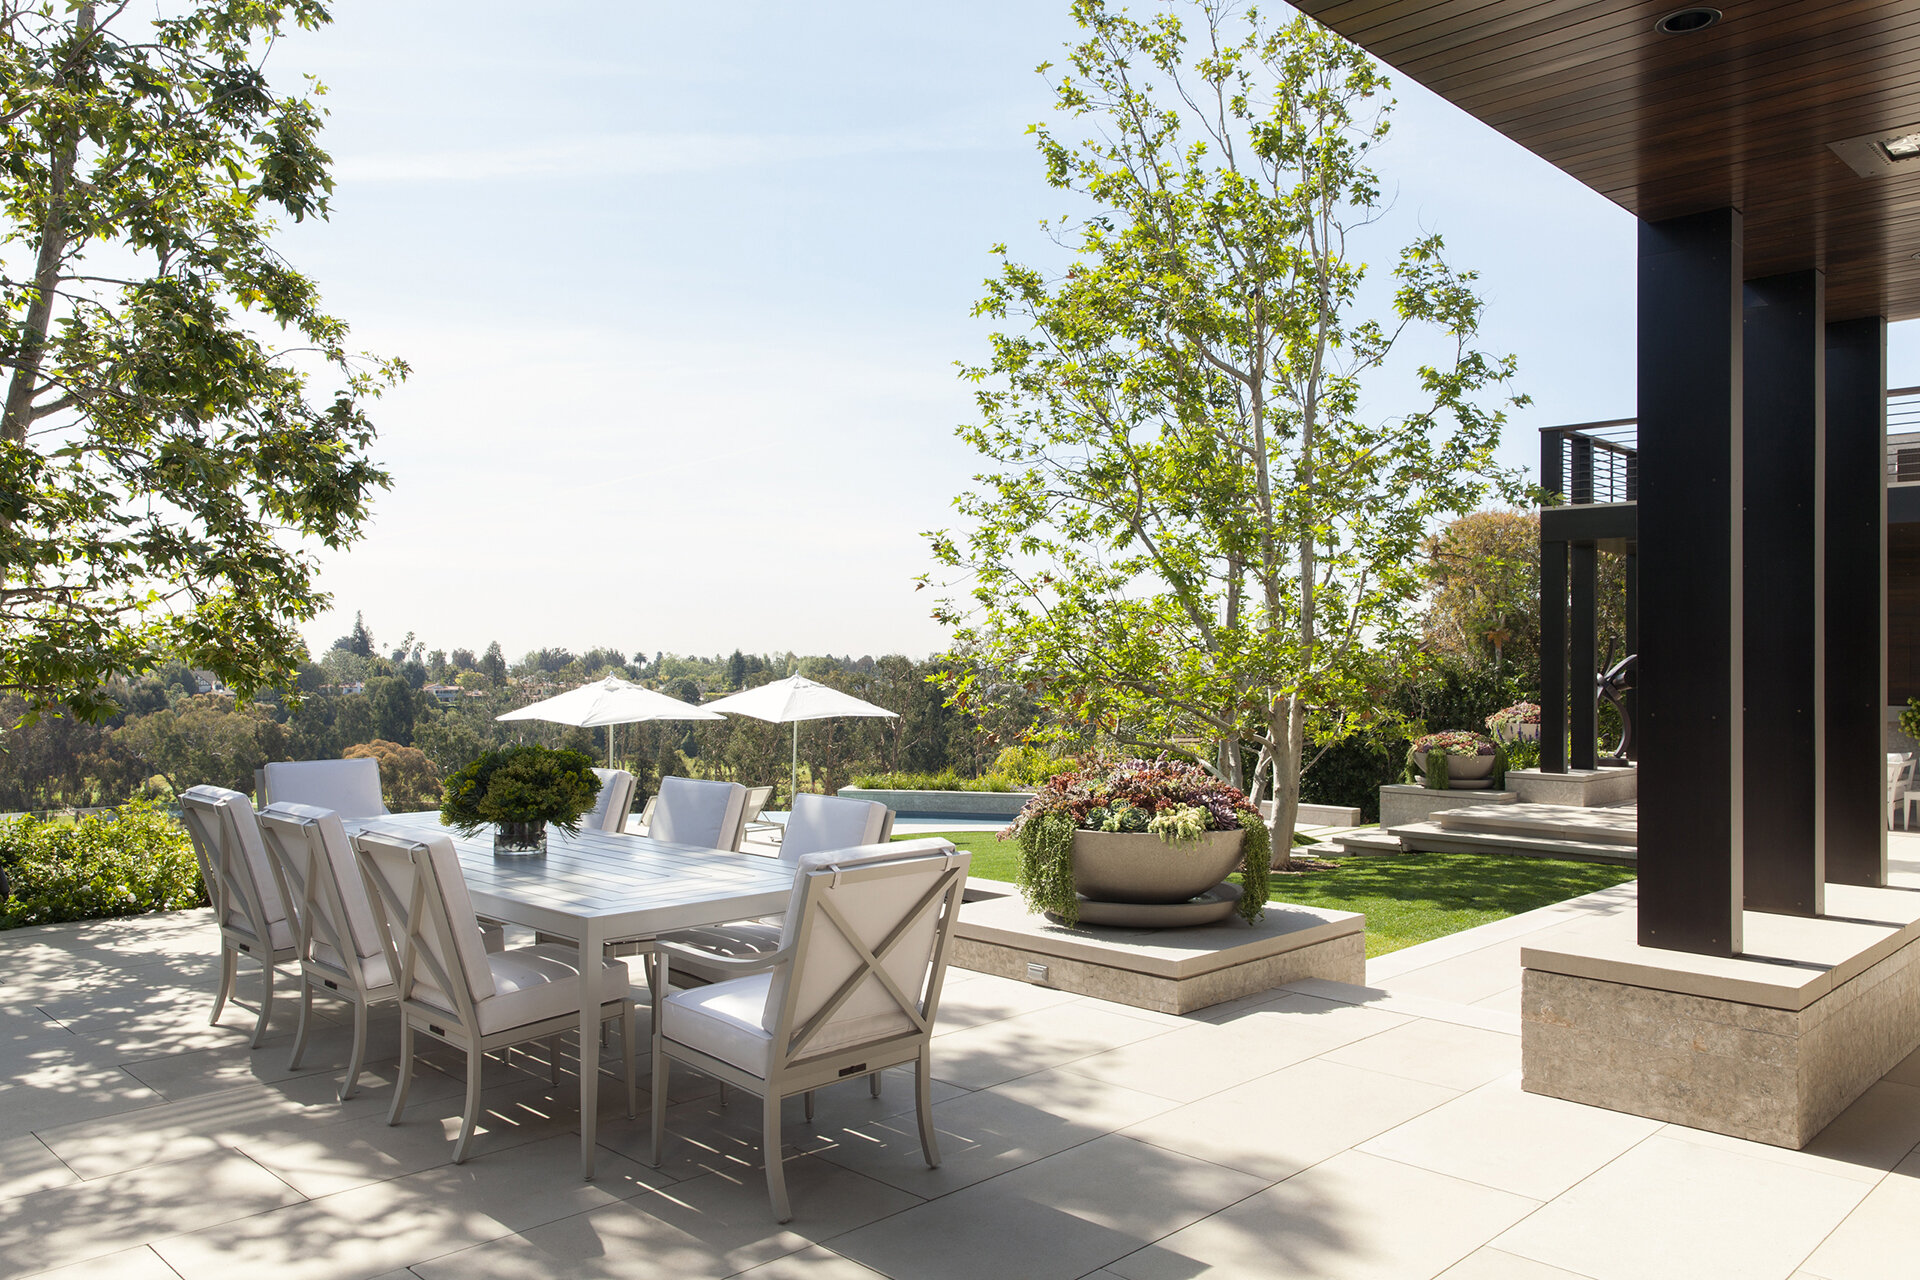  Luxury contemporary modern highest quality builder and general contractor custom home in the Pacific Palisades neighborhood of Los Angeles featuring architectural residence with beautiful landscaped back yard and patio published in Luxe Magazine.  